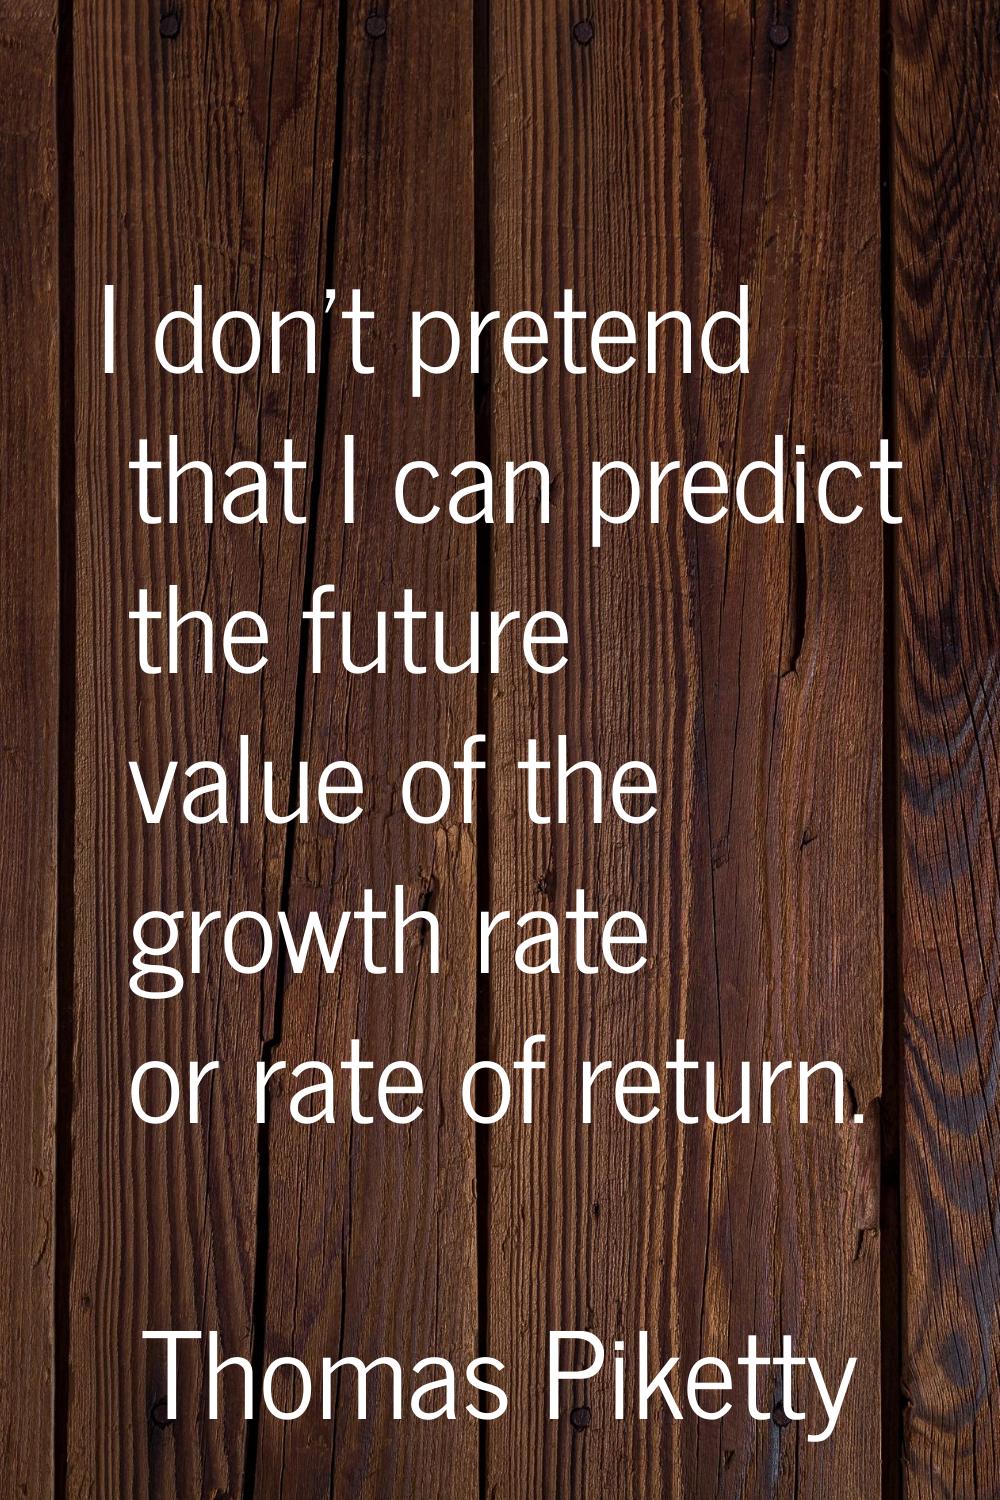 I don't pretend that I can predict the future value of the growth rate or rate of return.